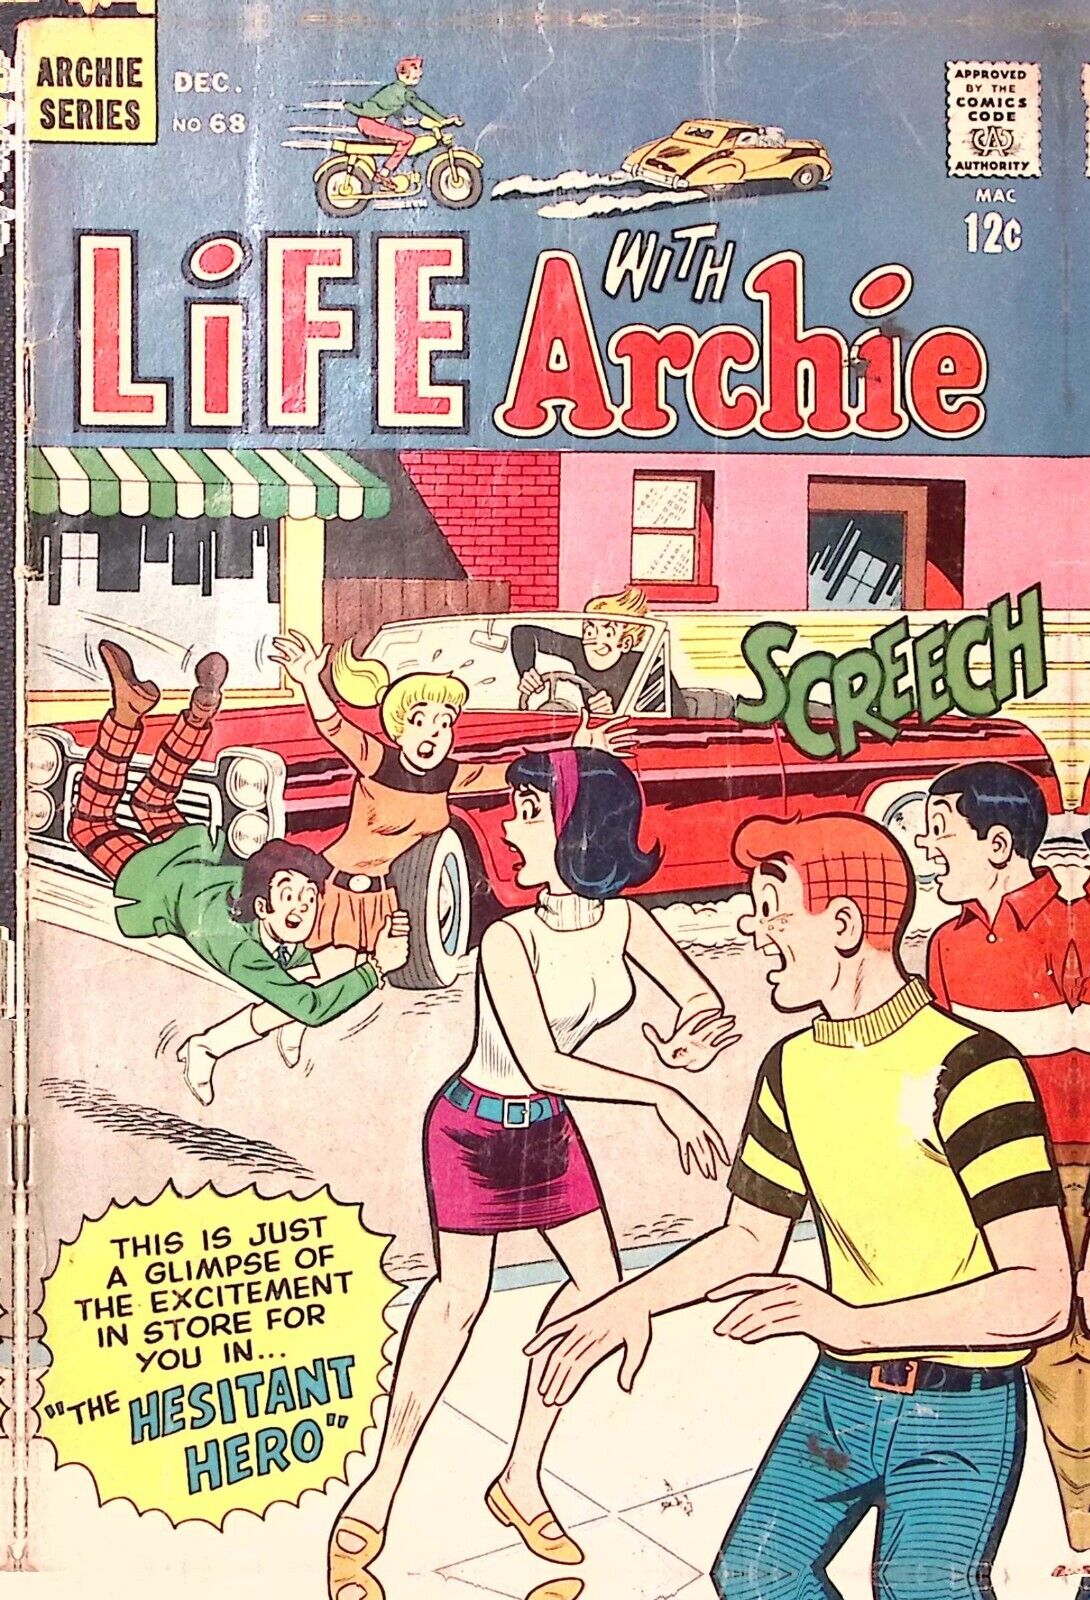 1967 LIFE WITH ARCHIE #68 DEC CASE OF THE HESITANT HERO ROCK A BYE  Z2368